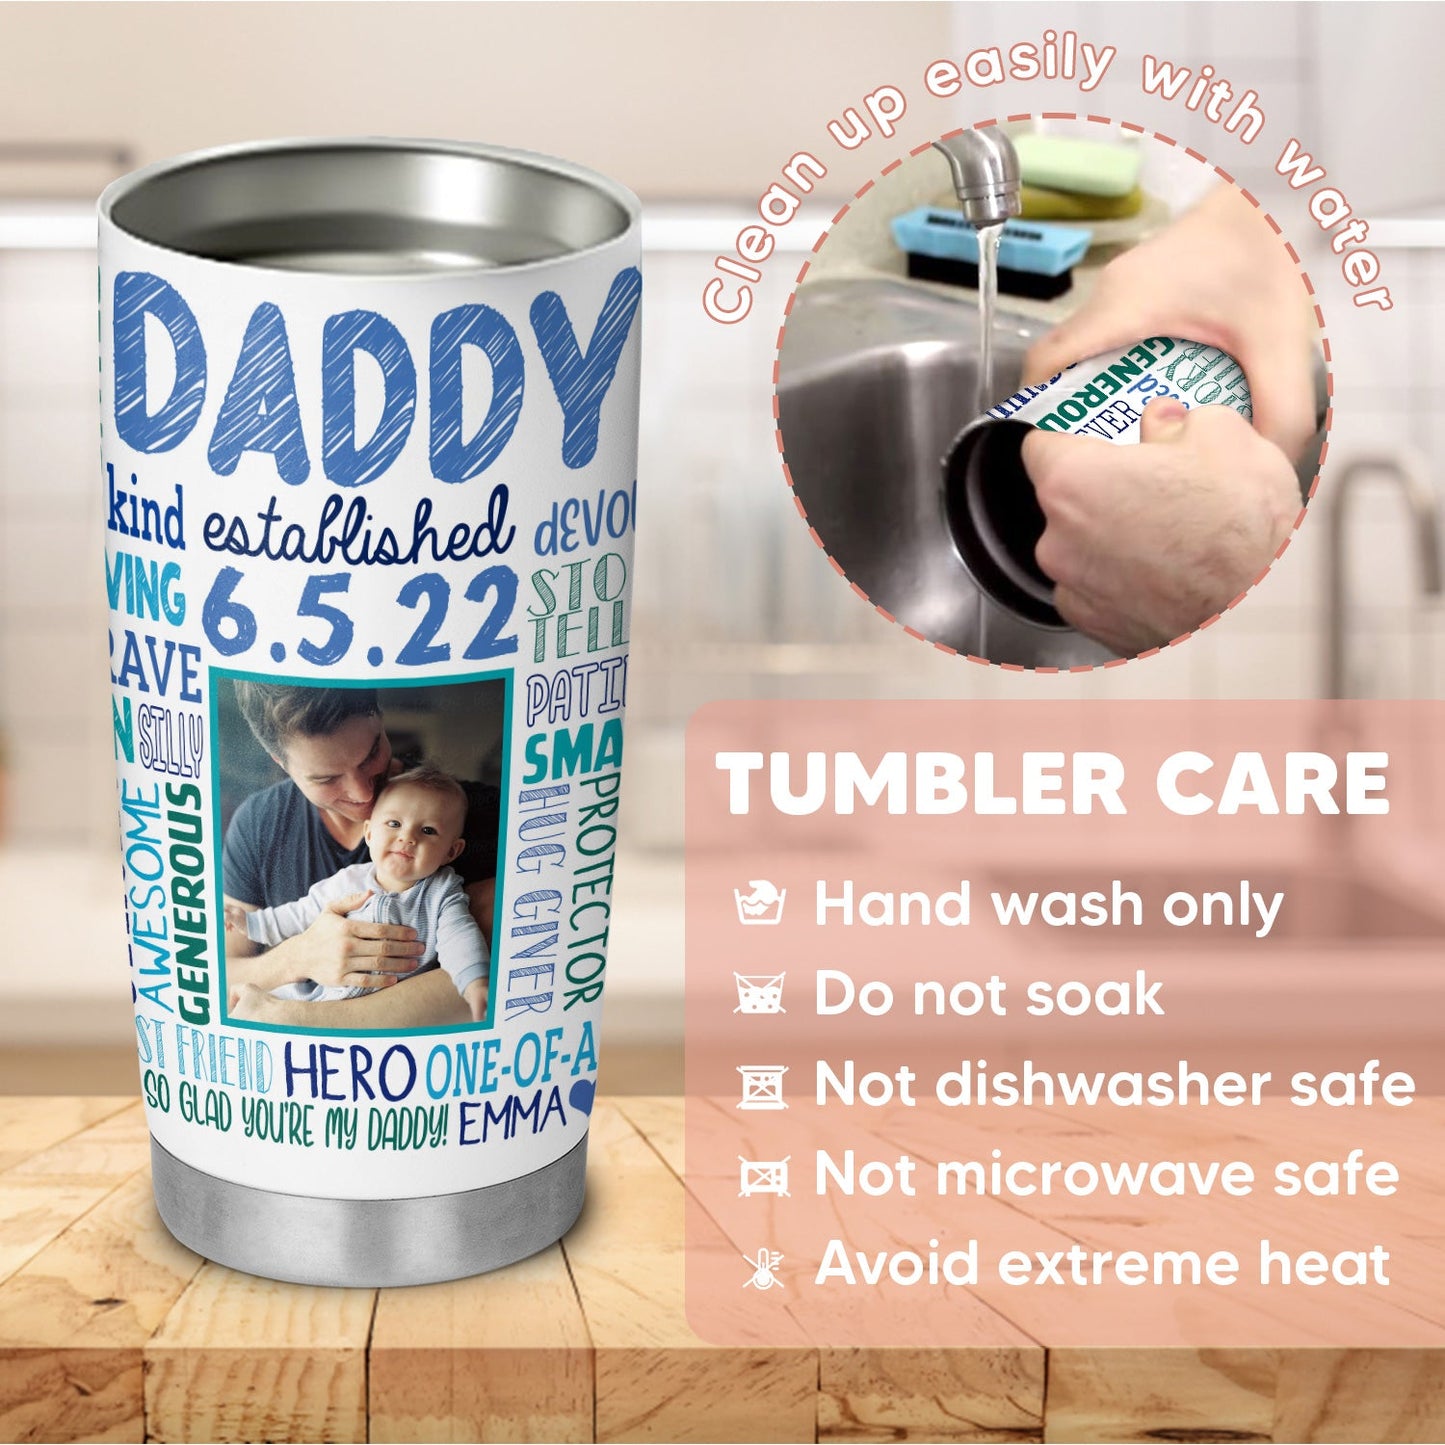 New Daddy First Fathers Day Personalized 20Oz Tumbler